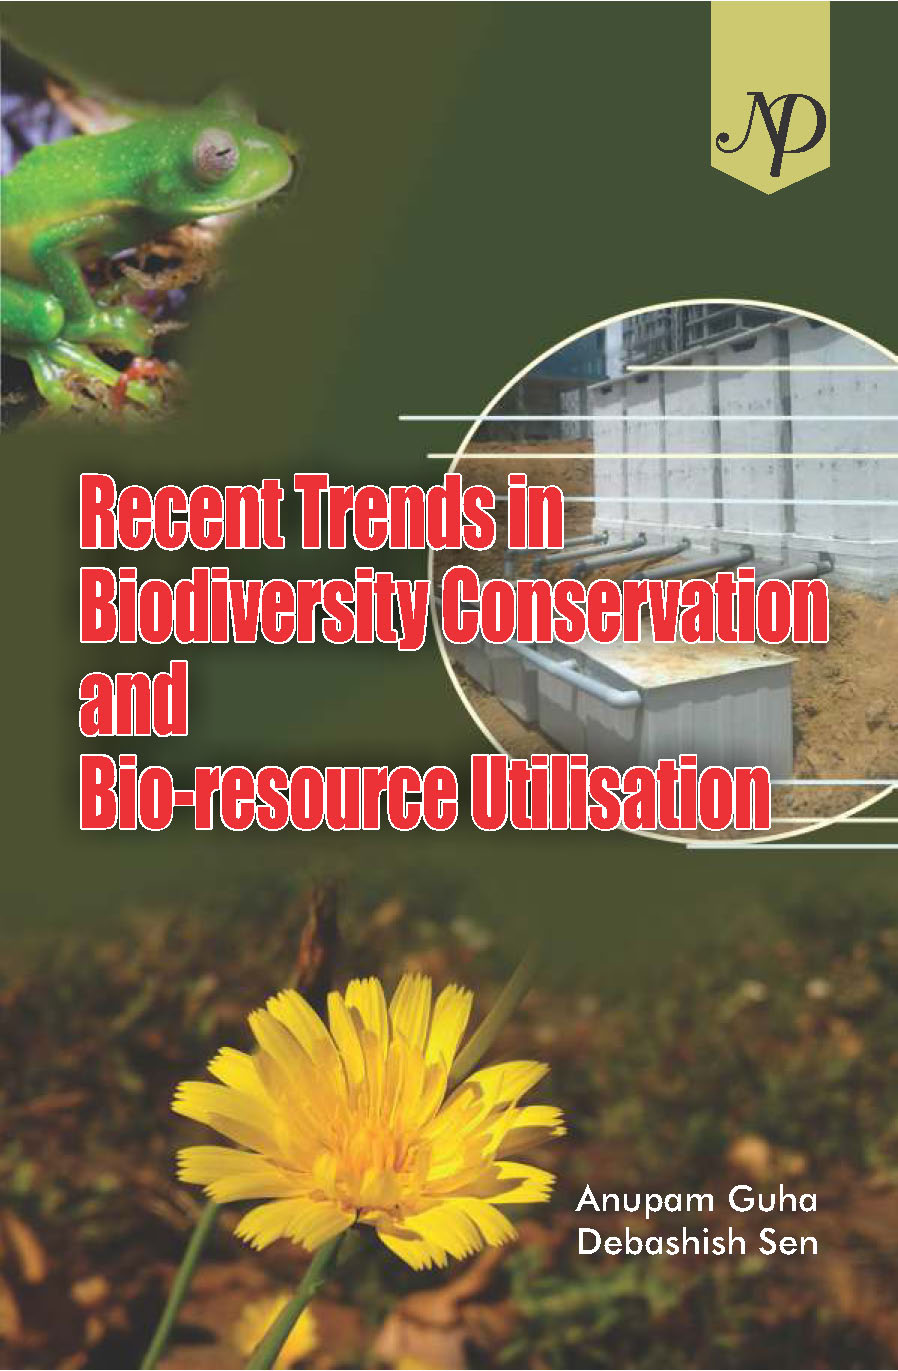 Recent trend in Biodiversity conservation cover.jpg